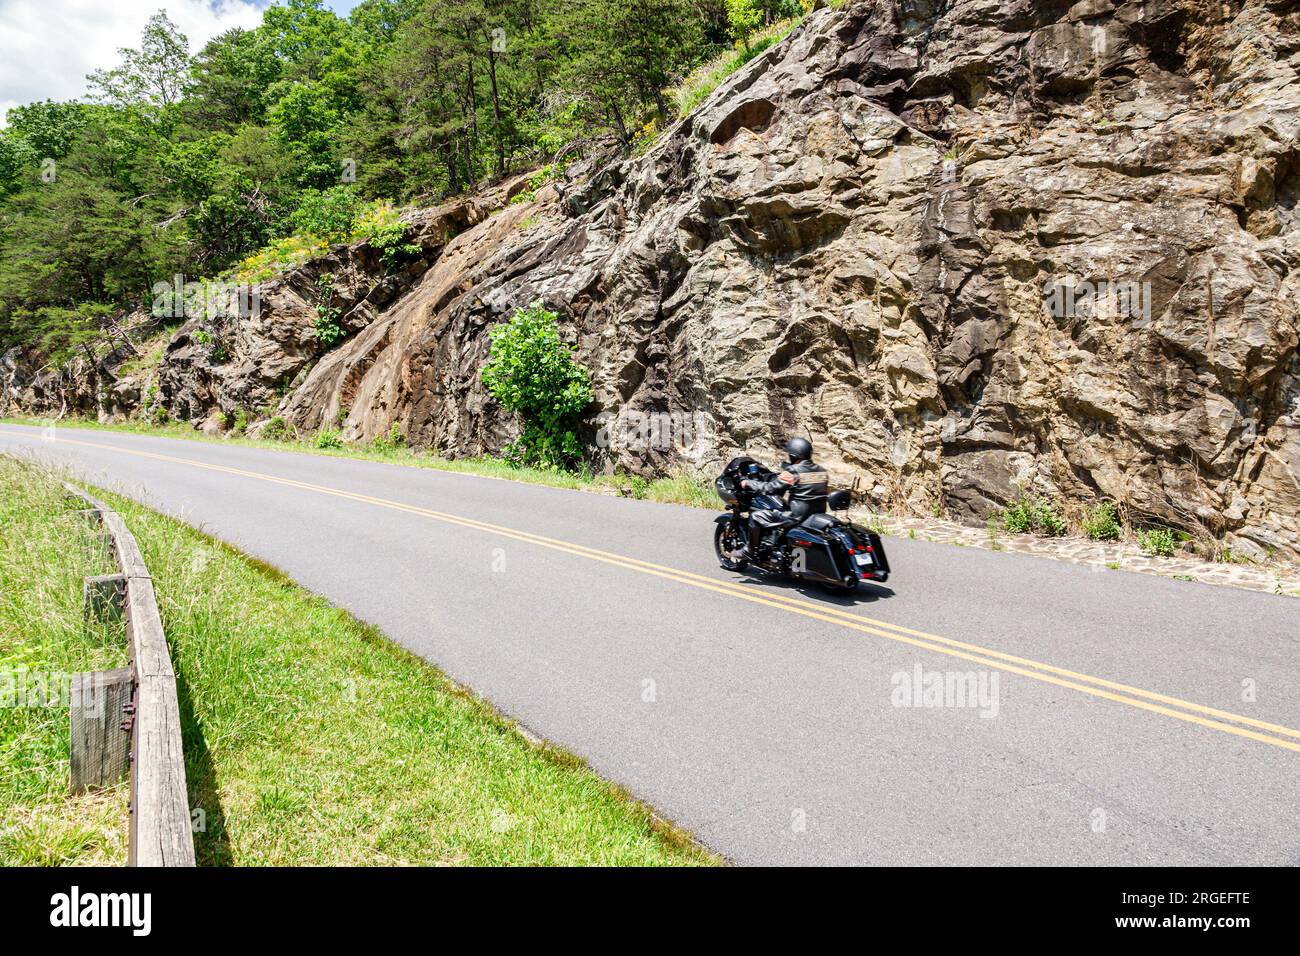 Asheville North Carolina,Appalachian Mountains,Blue Ridge Parkway,Haw Creek Valley Overlook,road vehicle rocky cliff carved motorcycle Stock Photo